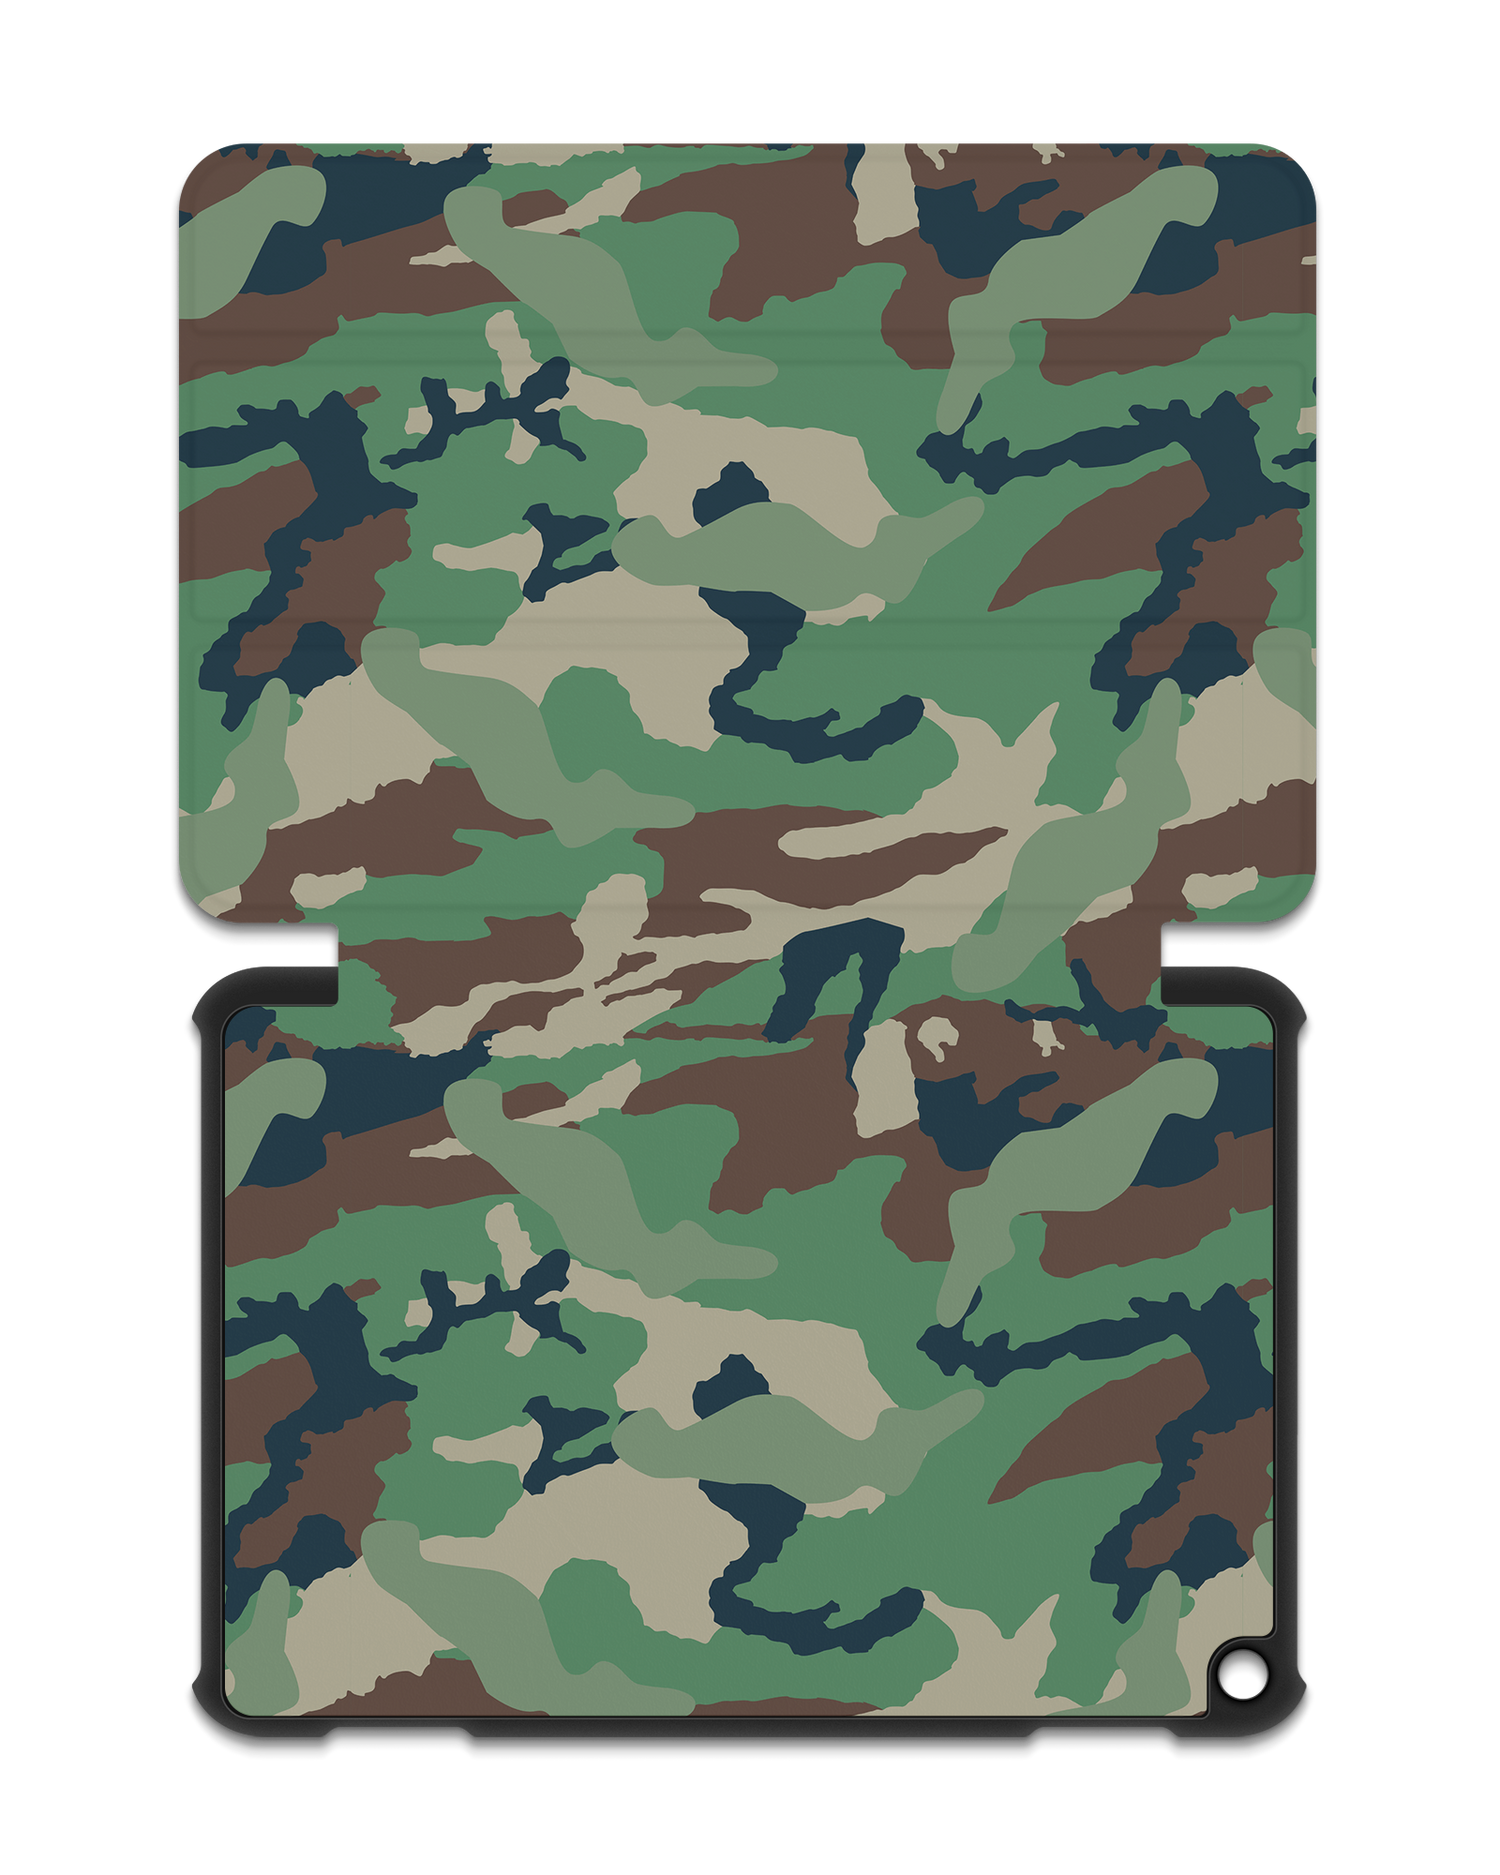 Green and Brown Camo Tablet Smart Case für Amazon Fire HD 8 (2022), Amazon Fire HD 8 Plus (2022), Amazon Fire HD 8 (2020), Amazon Fire HD 8 Plus (2020): Aufgeklappt